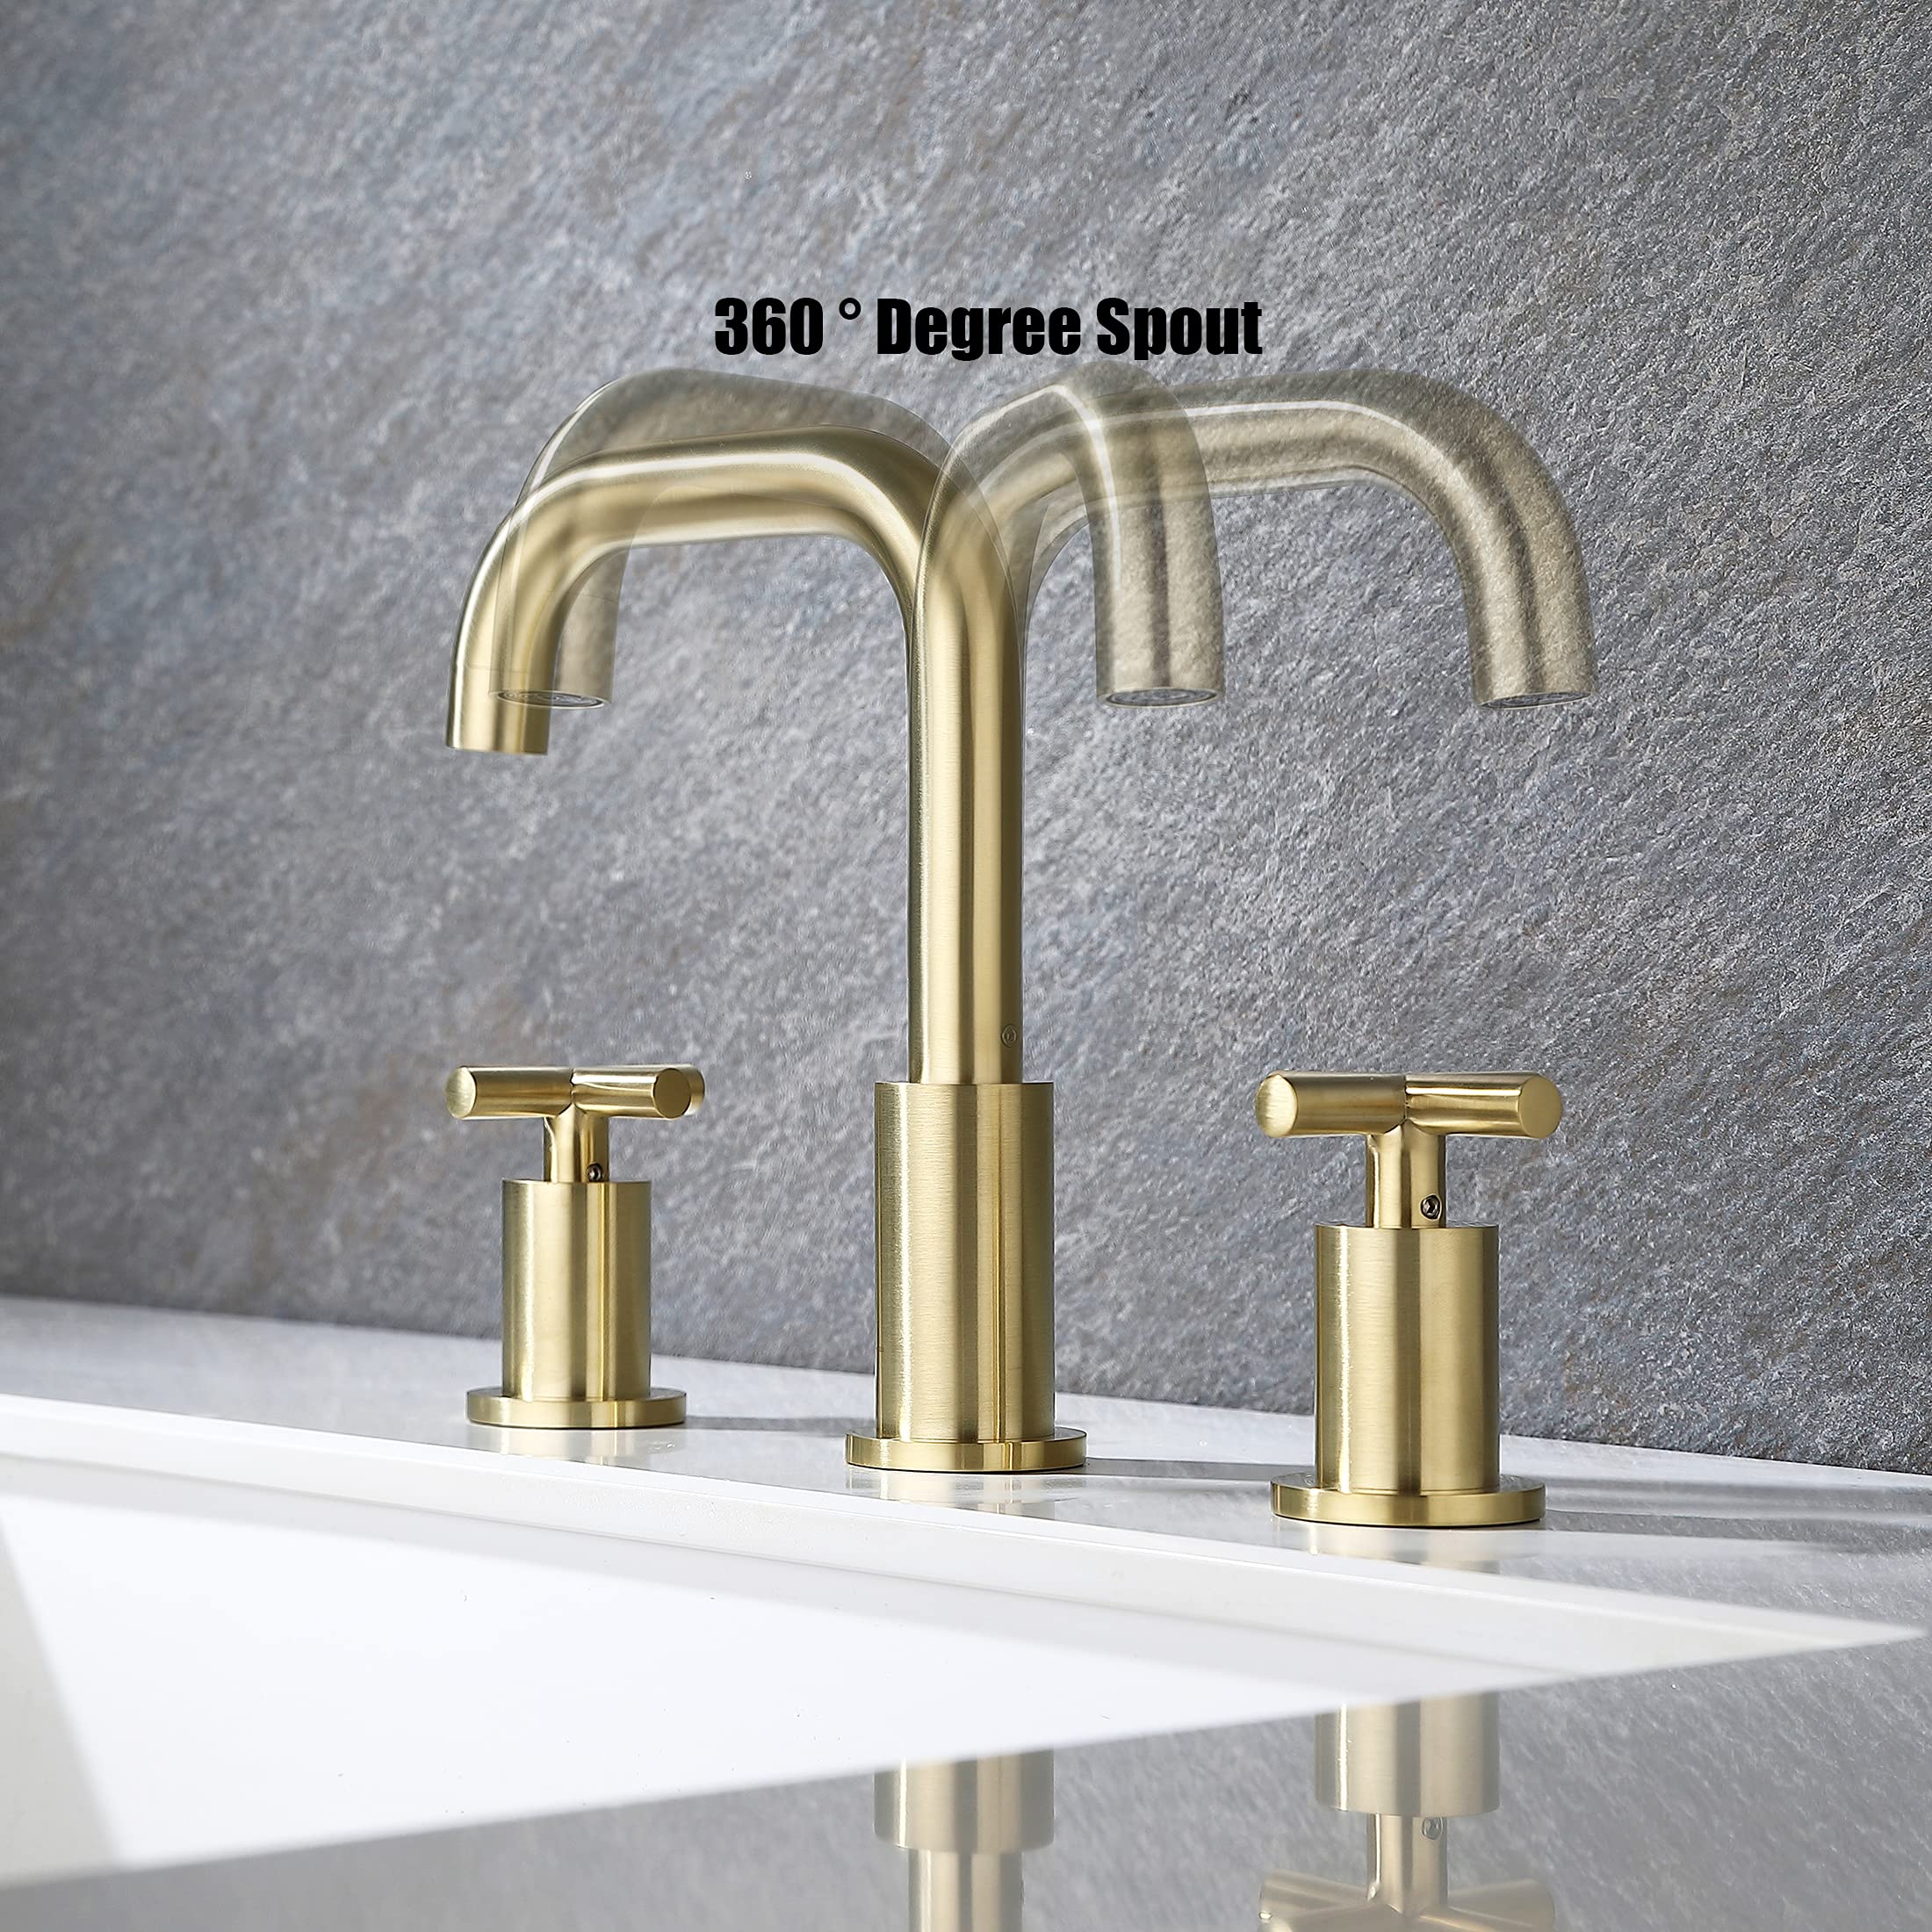 8 Inches Widespread Bathroom Faucet Brushed Gold, 2 Handle Brass Bathroom Faucets for Sink 3 Hole with Valve and Pop-Up Drain Assembly by ChiLDano, CH3163BG